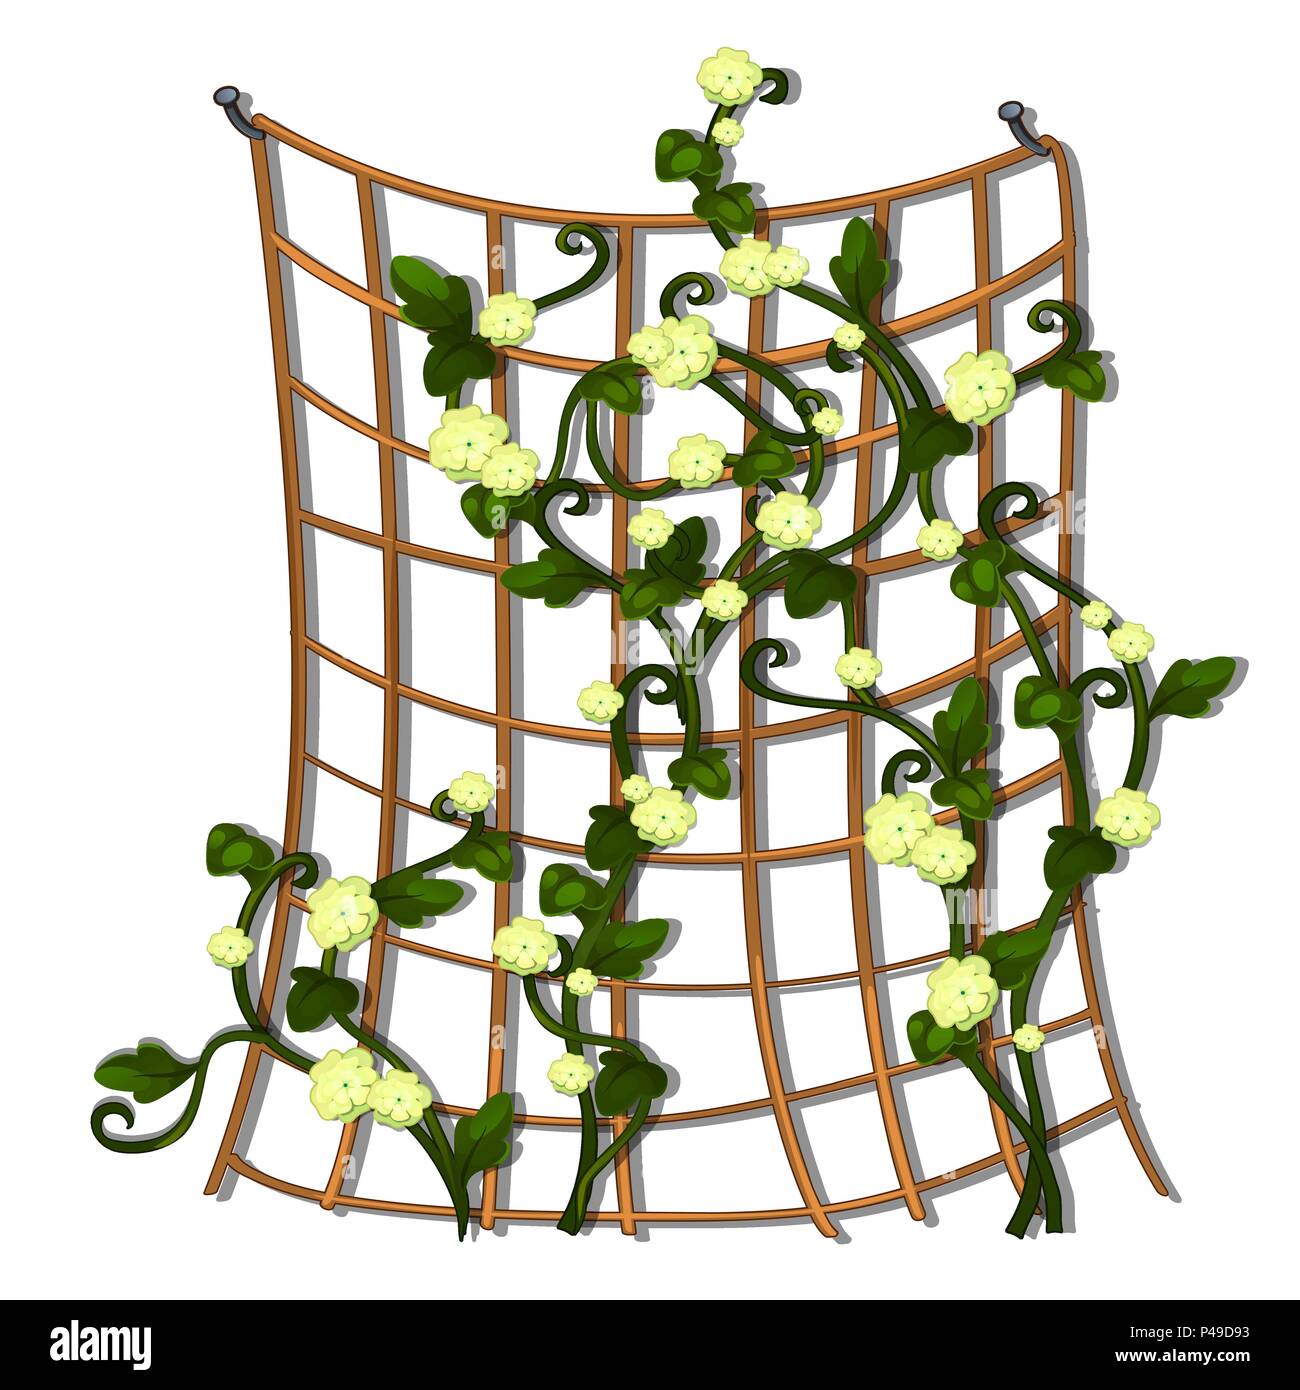 Decorative hedge made of grid tied brown rope with climbing flowering plants isolated on white background. Vector cartoon close-up illustration. Stock Vector